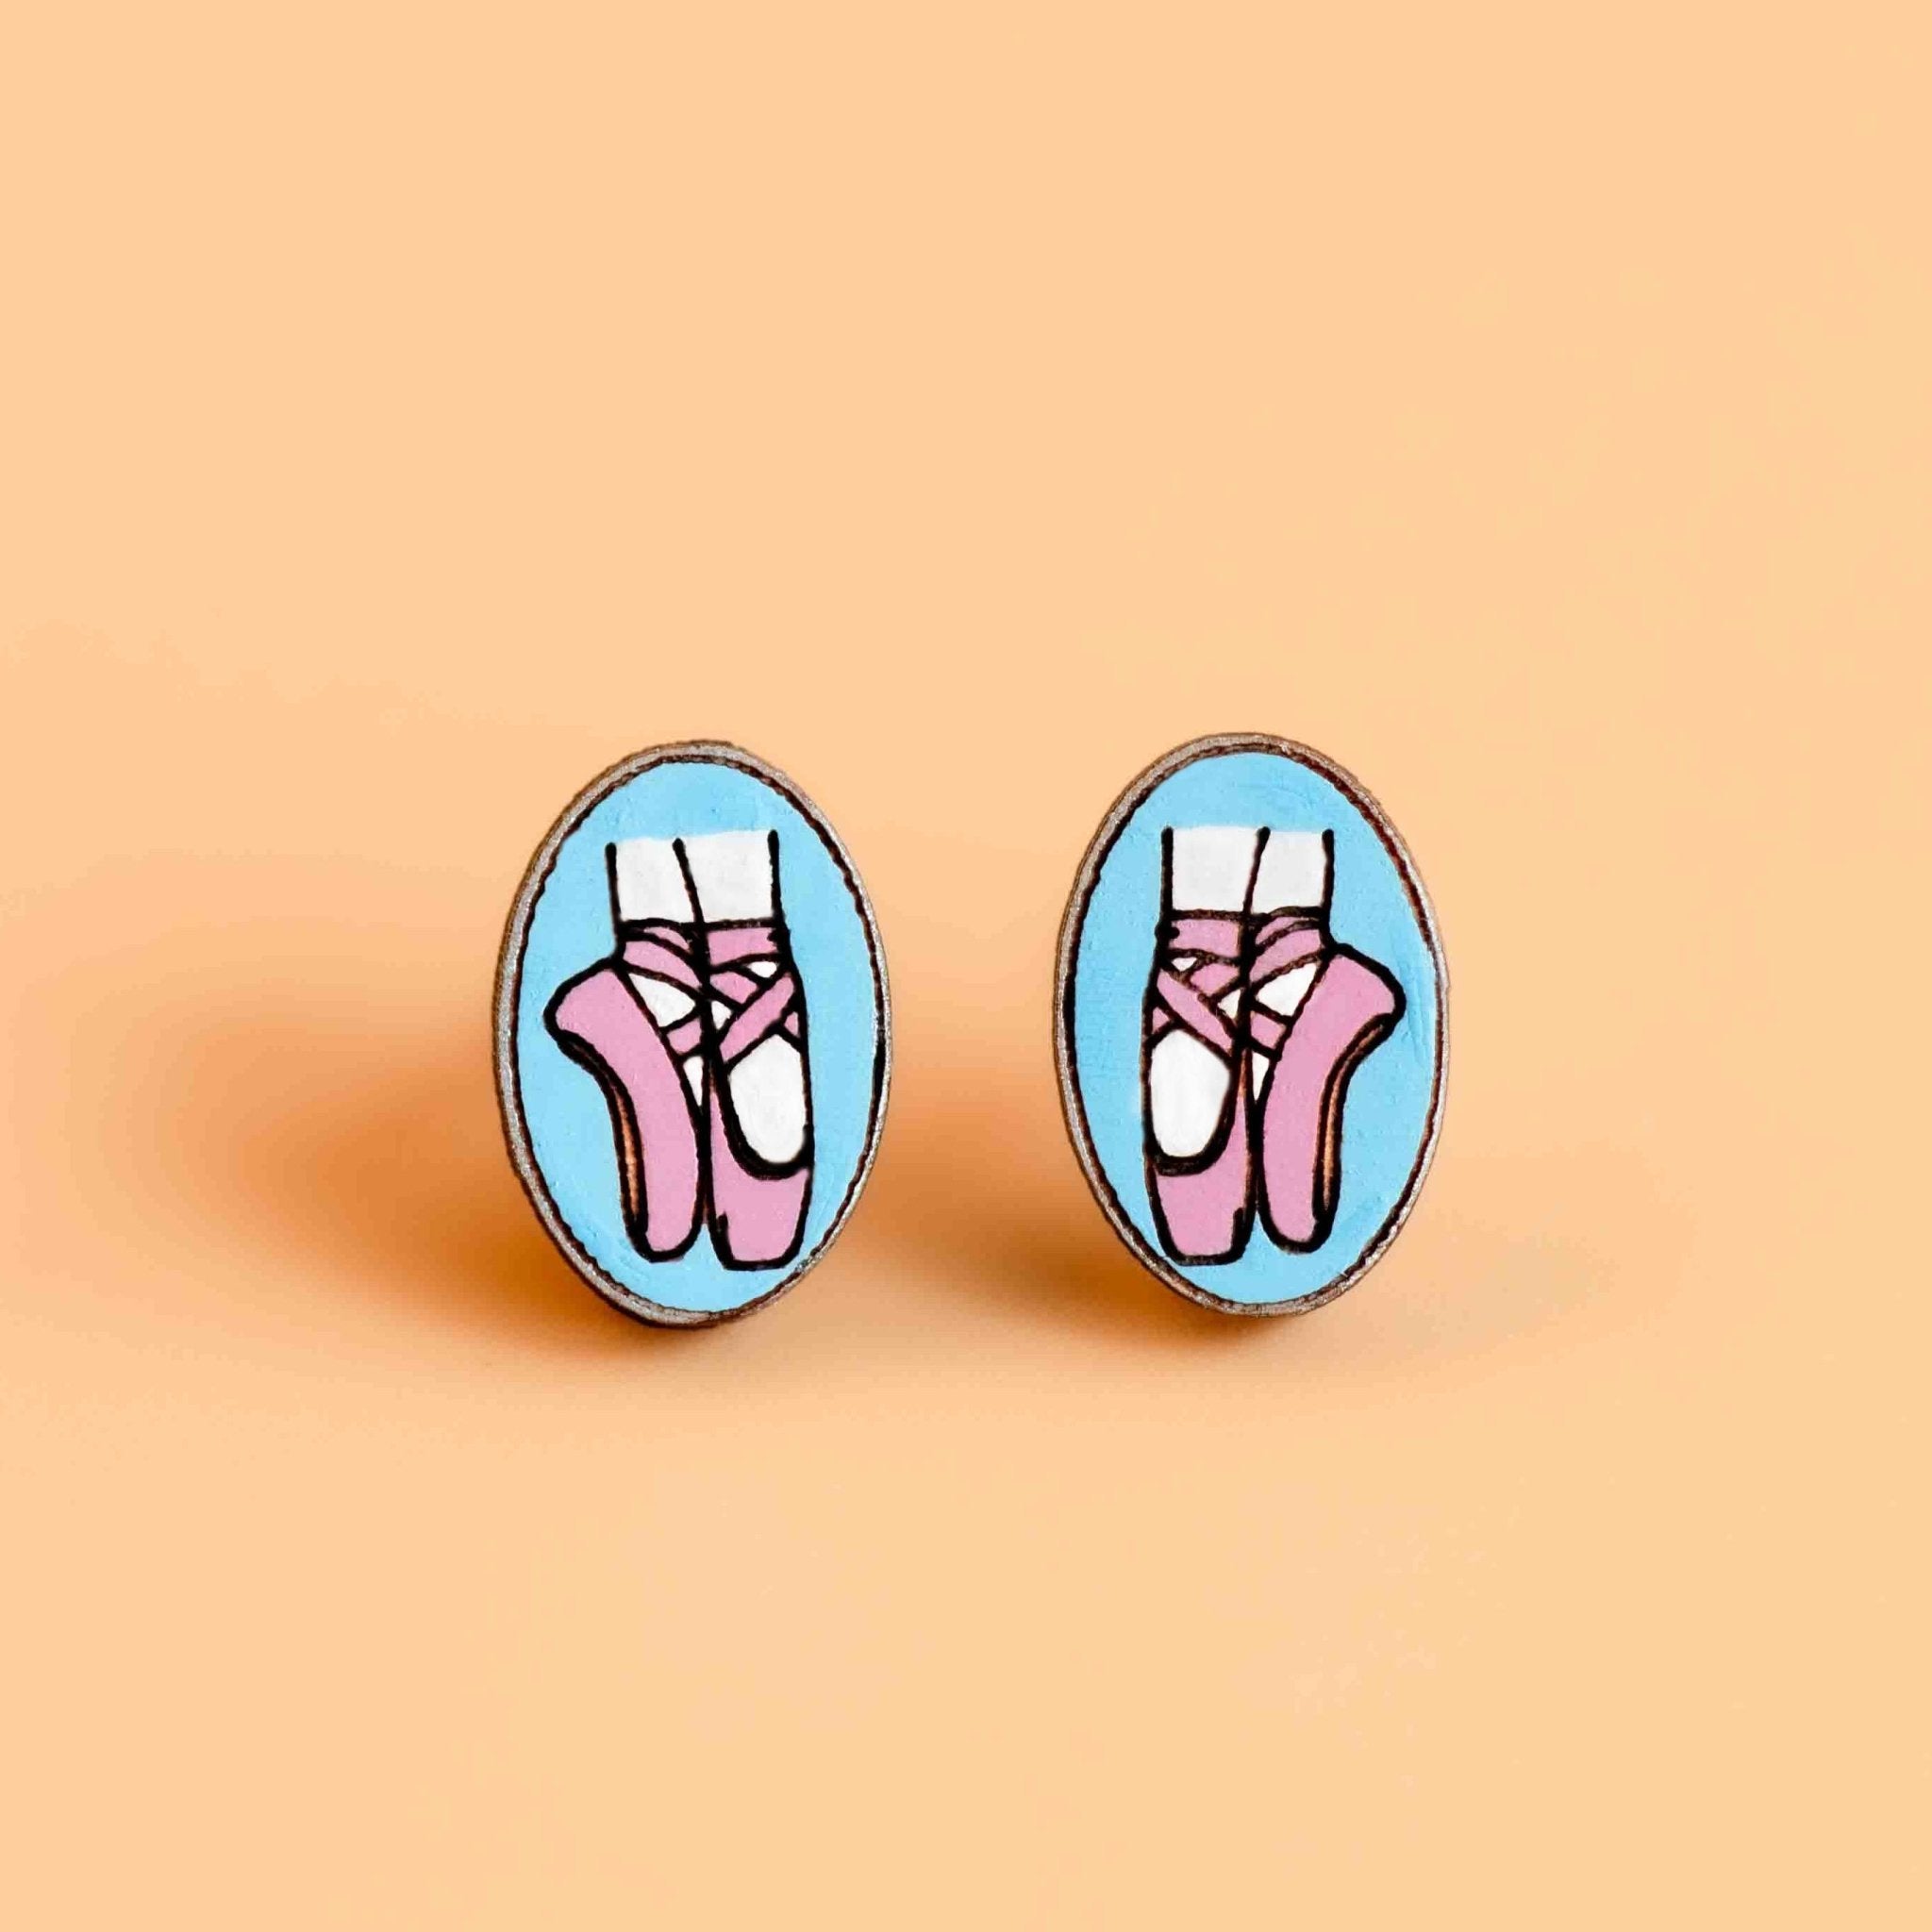 Hand-painted Oval Ballet Shoes Cherry Wood Stud Earrings - PET15117 - Robin Valley Official Store